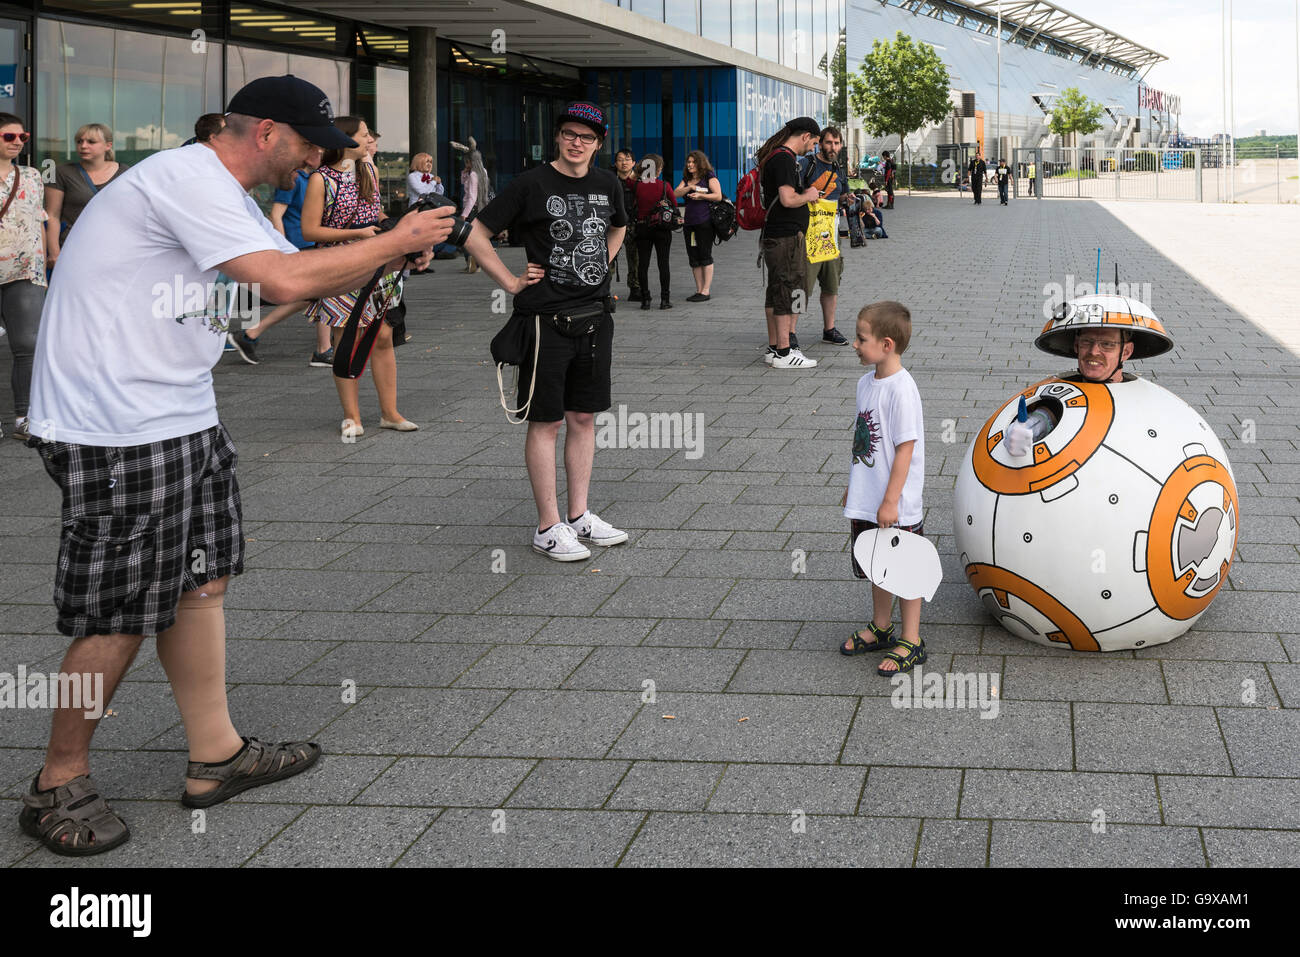 Stuttgart, Germany - June 25, 2016: A cosplayer with a selfmade costume of the BB Unit from Star Wars is posing during the Comic Stock Photo